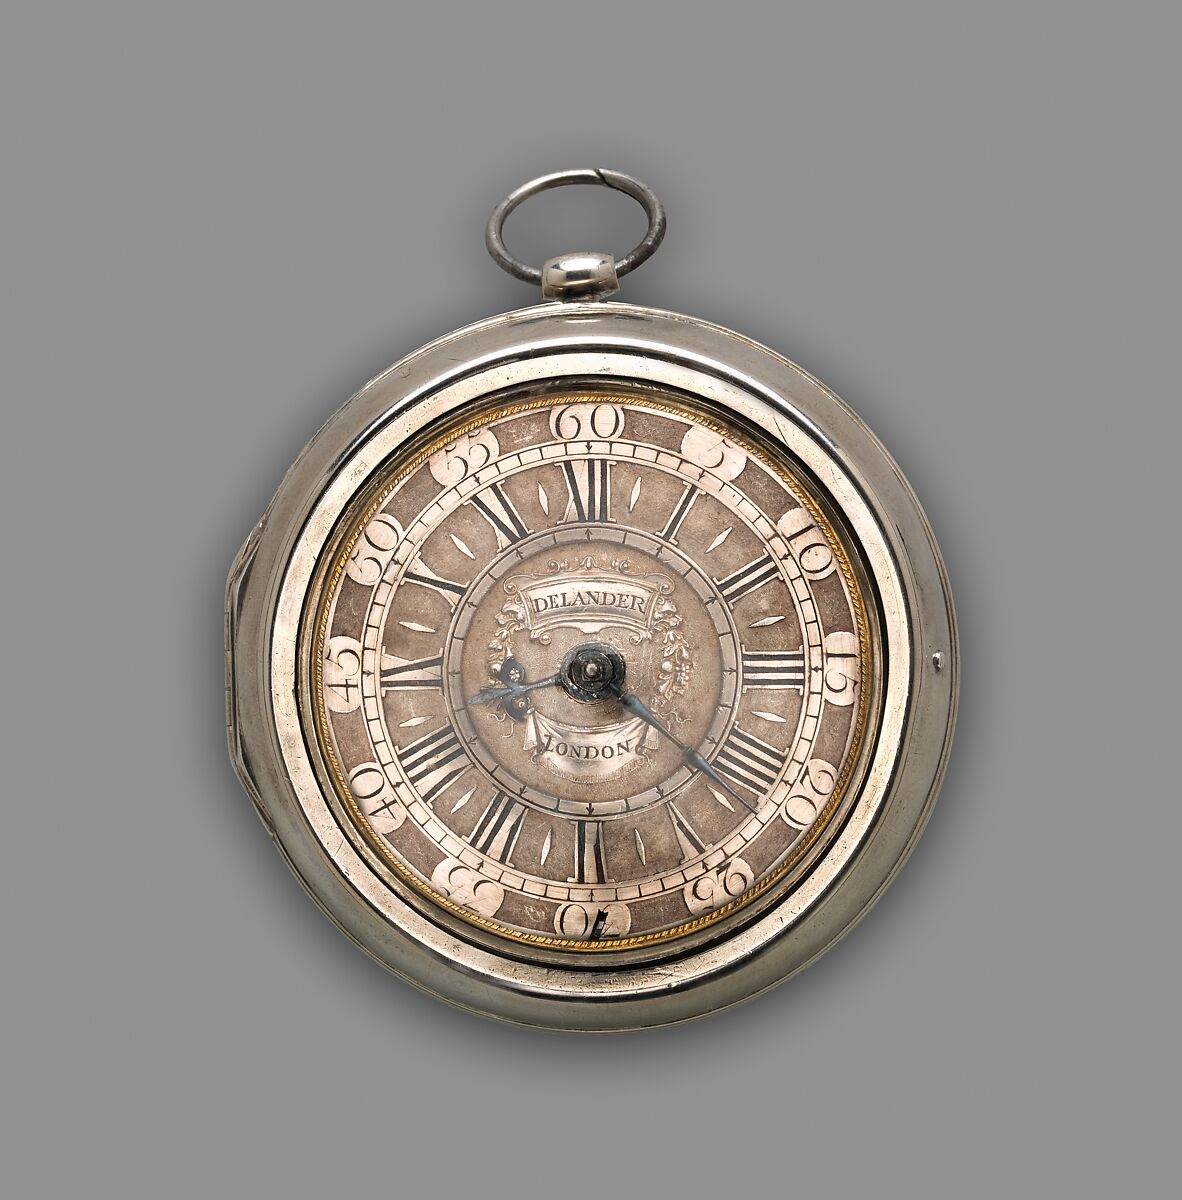 Pair-case watch, Watchmaker: Daniel Delander (British, 1678–1733), Outer case, inner case, and champlevé dial: silver and blued steel hands; Movement: gilded brass, steel, and diamond endstone, British, London 